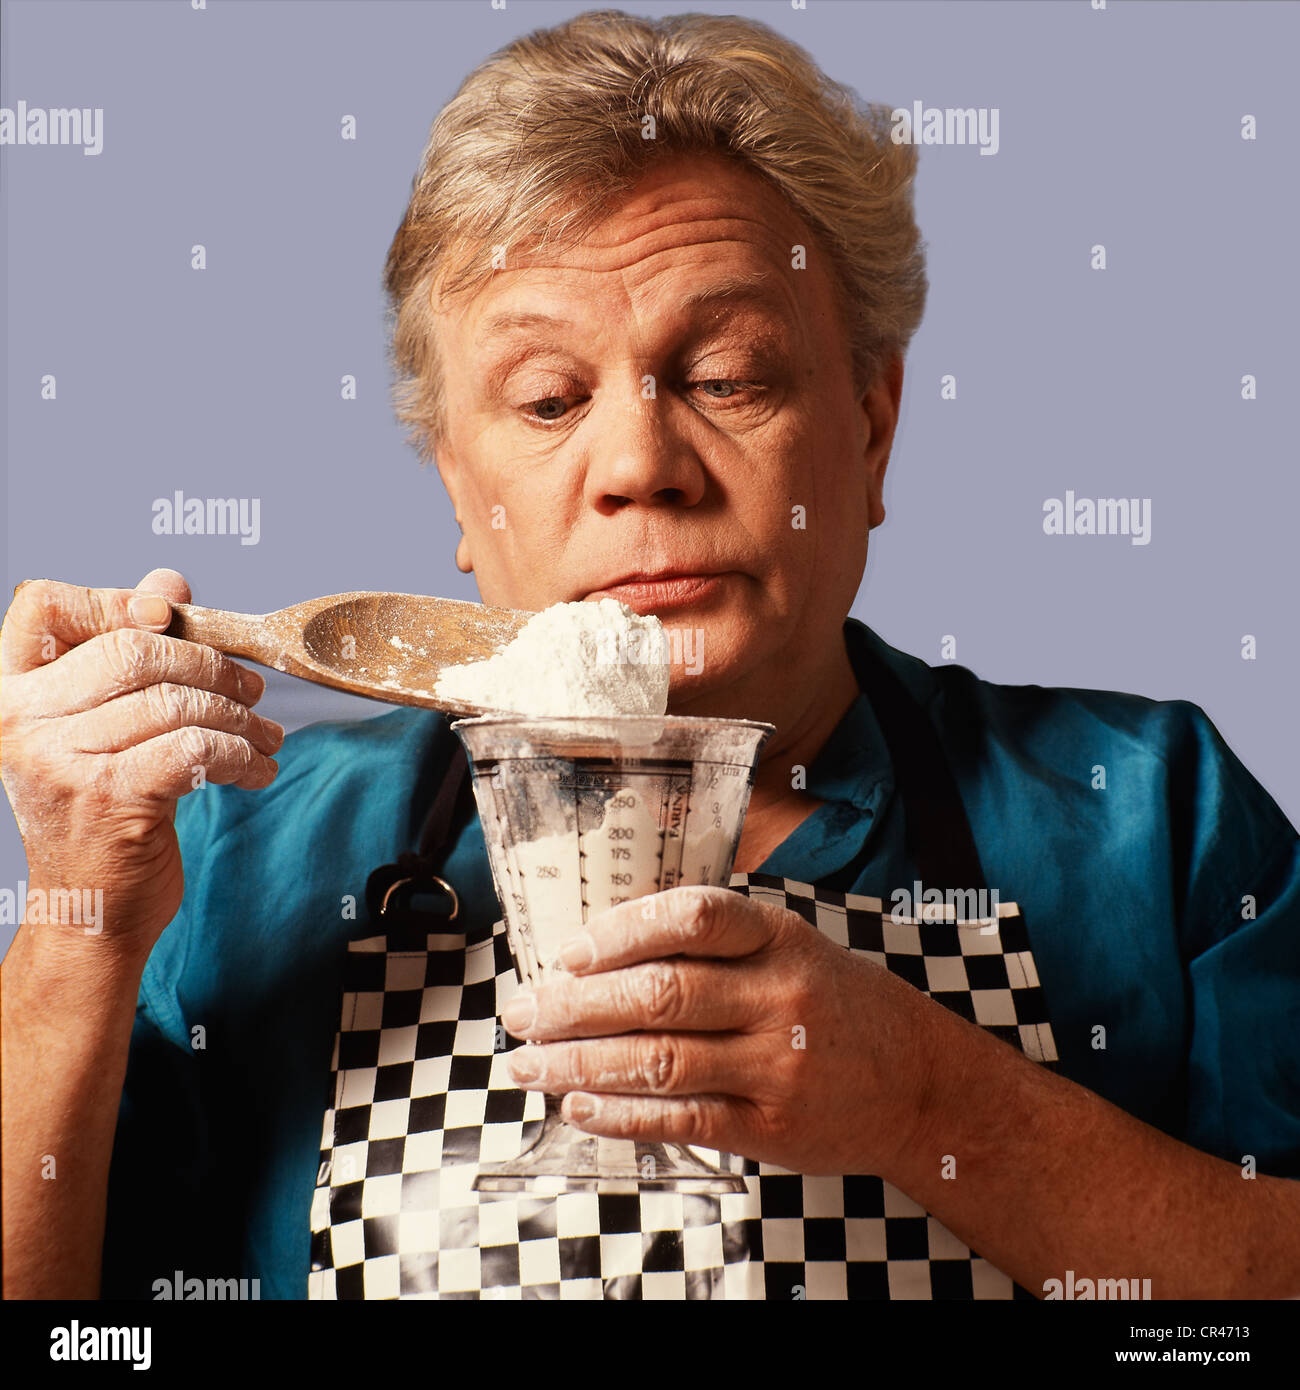 https://c8.alamy.com/comp/CR4713/older-diabetic-man-weighing-flour-minding-the-right-amount-of-ingredients-CR4713.jpg